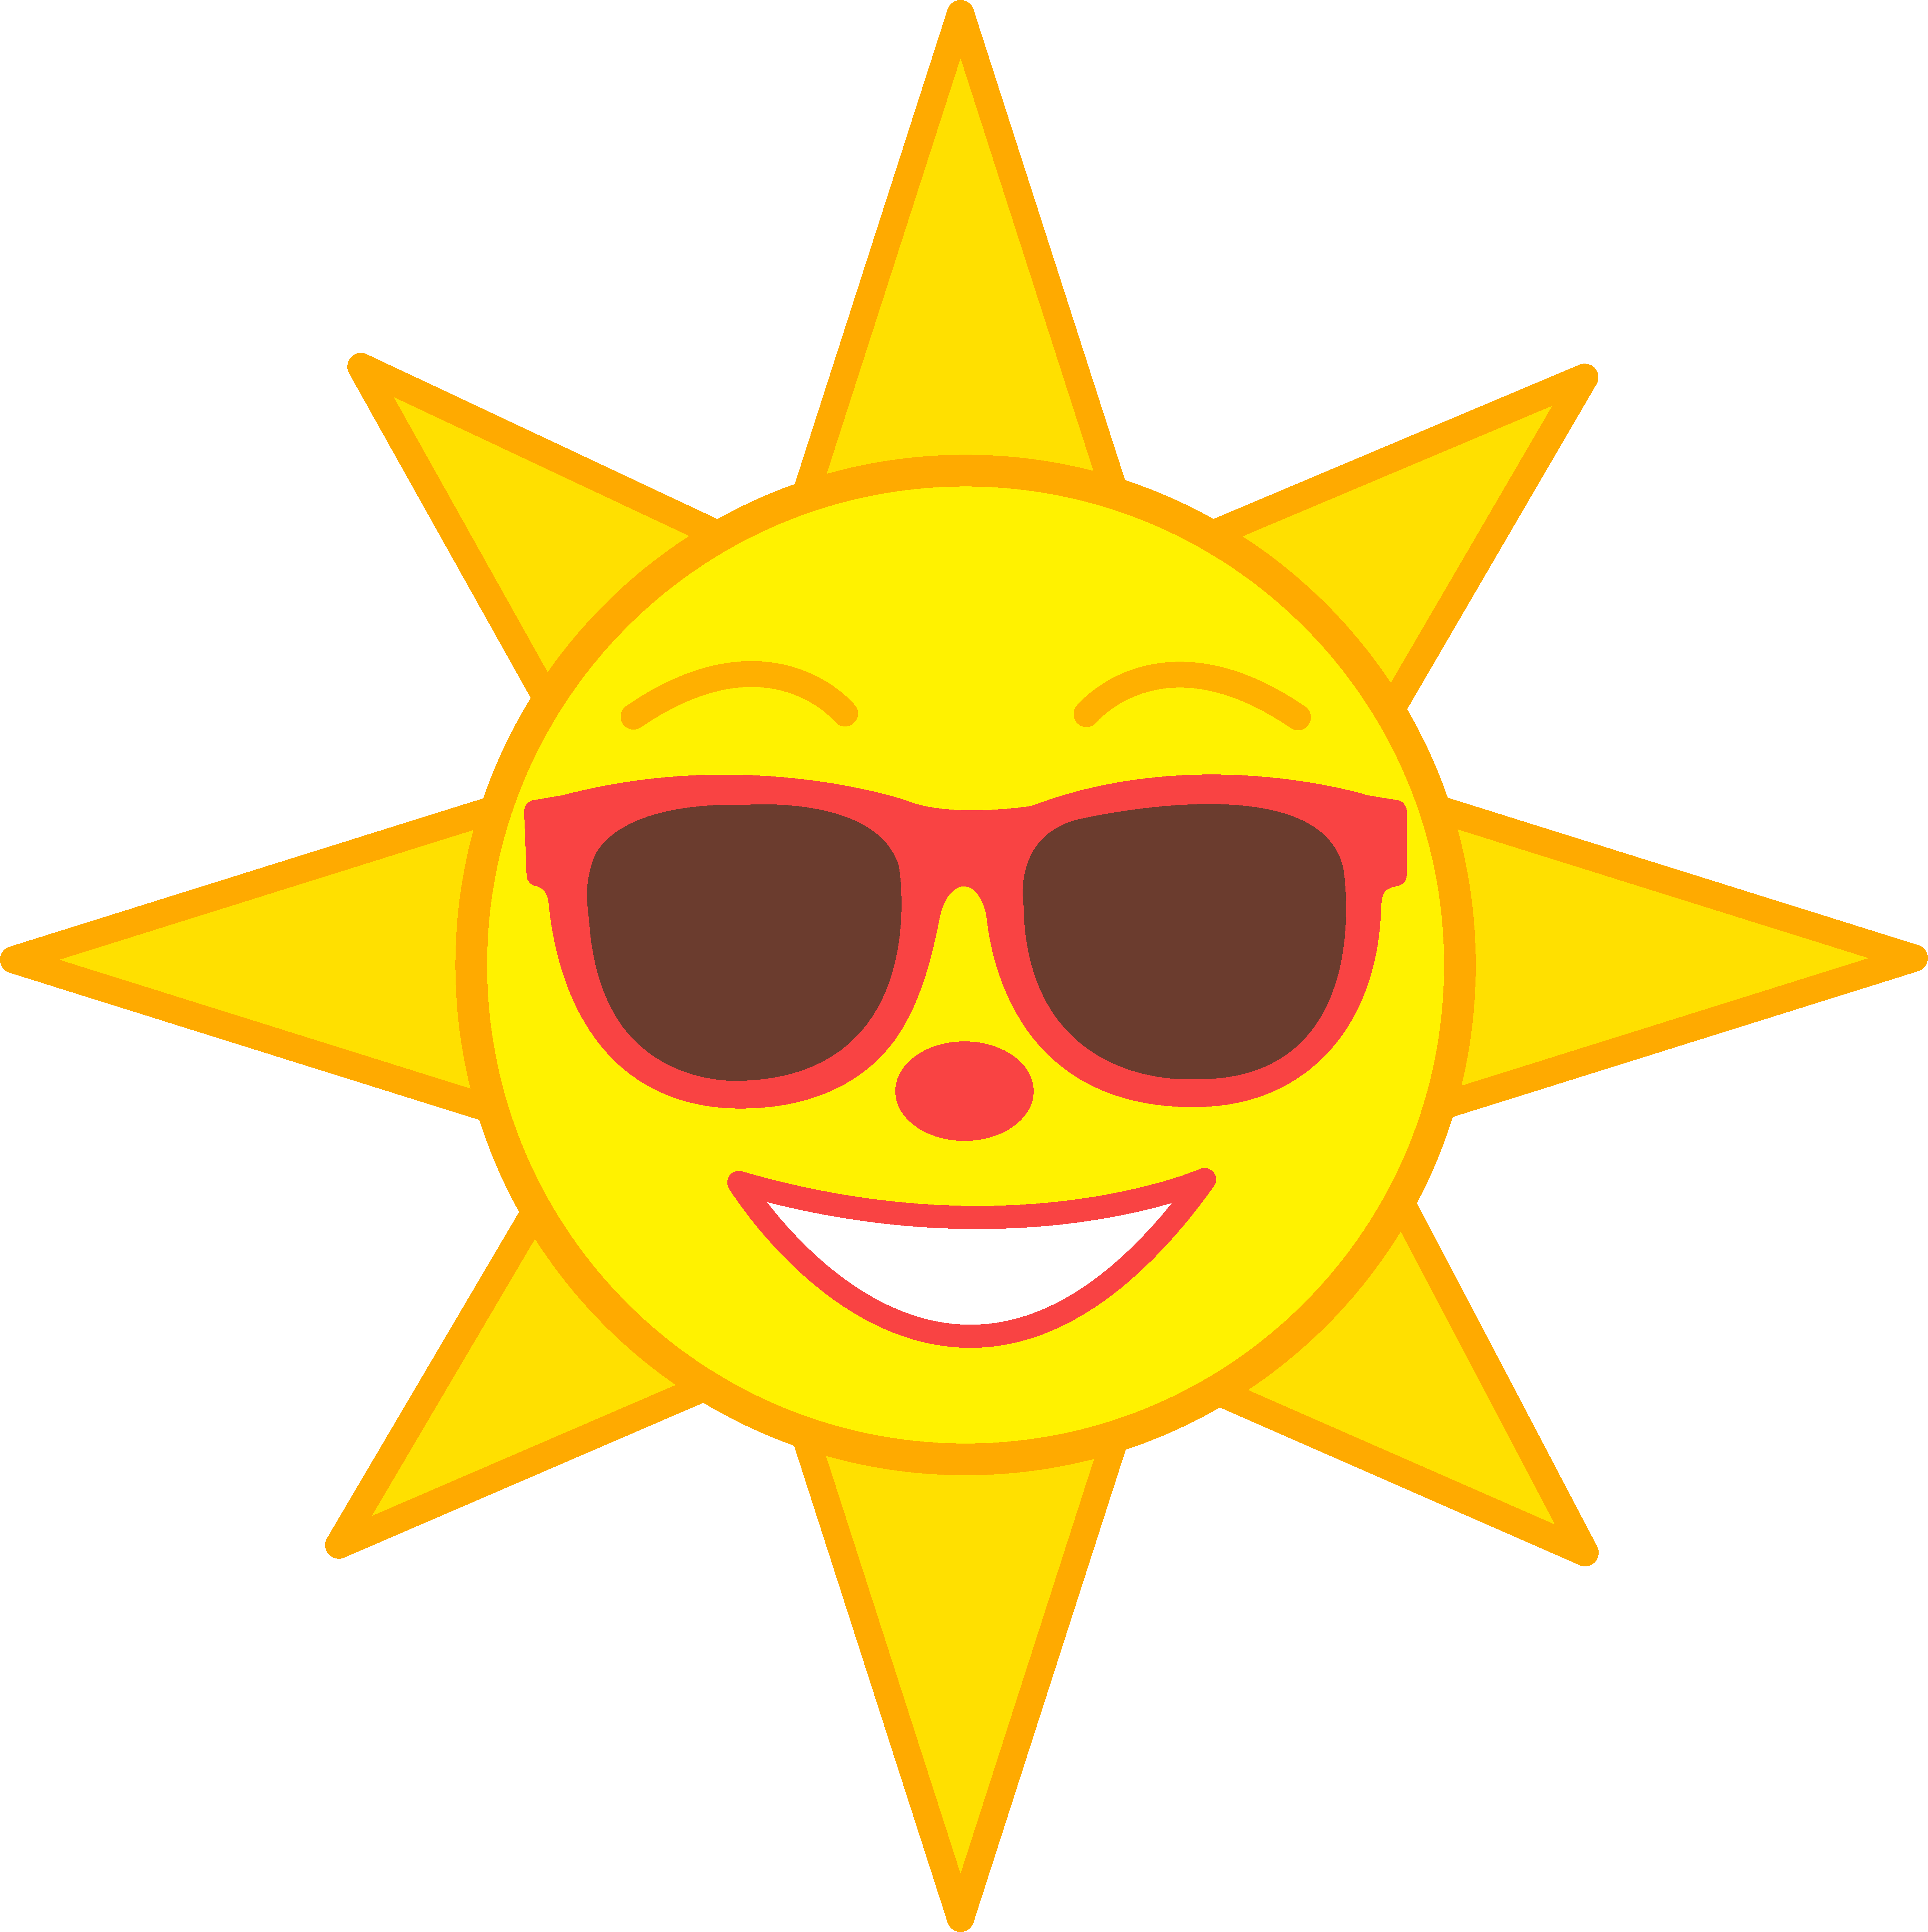 Smiling Sun Clipart Royalty Free | Clipart library - Free Clipart Images